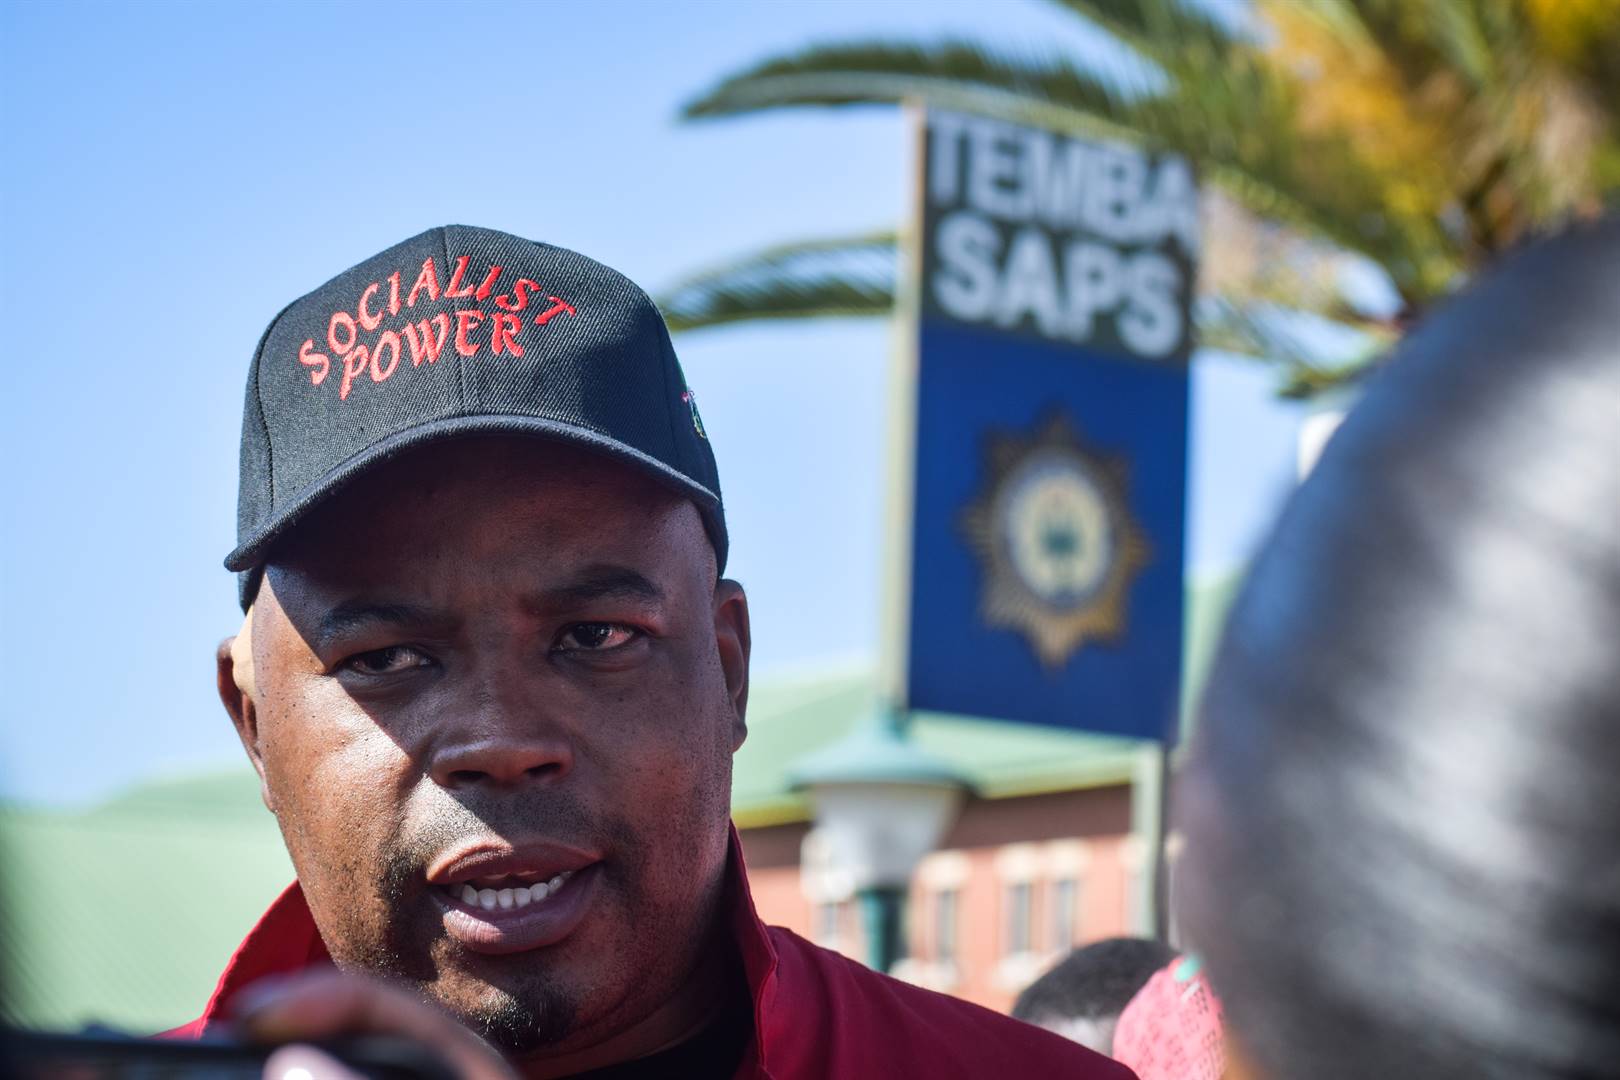 News24 | EFF Tshwane leader claims 'm**r a Boer' was aimed at FF Plus member, not Afrikaner community